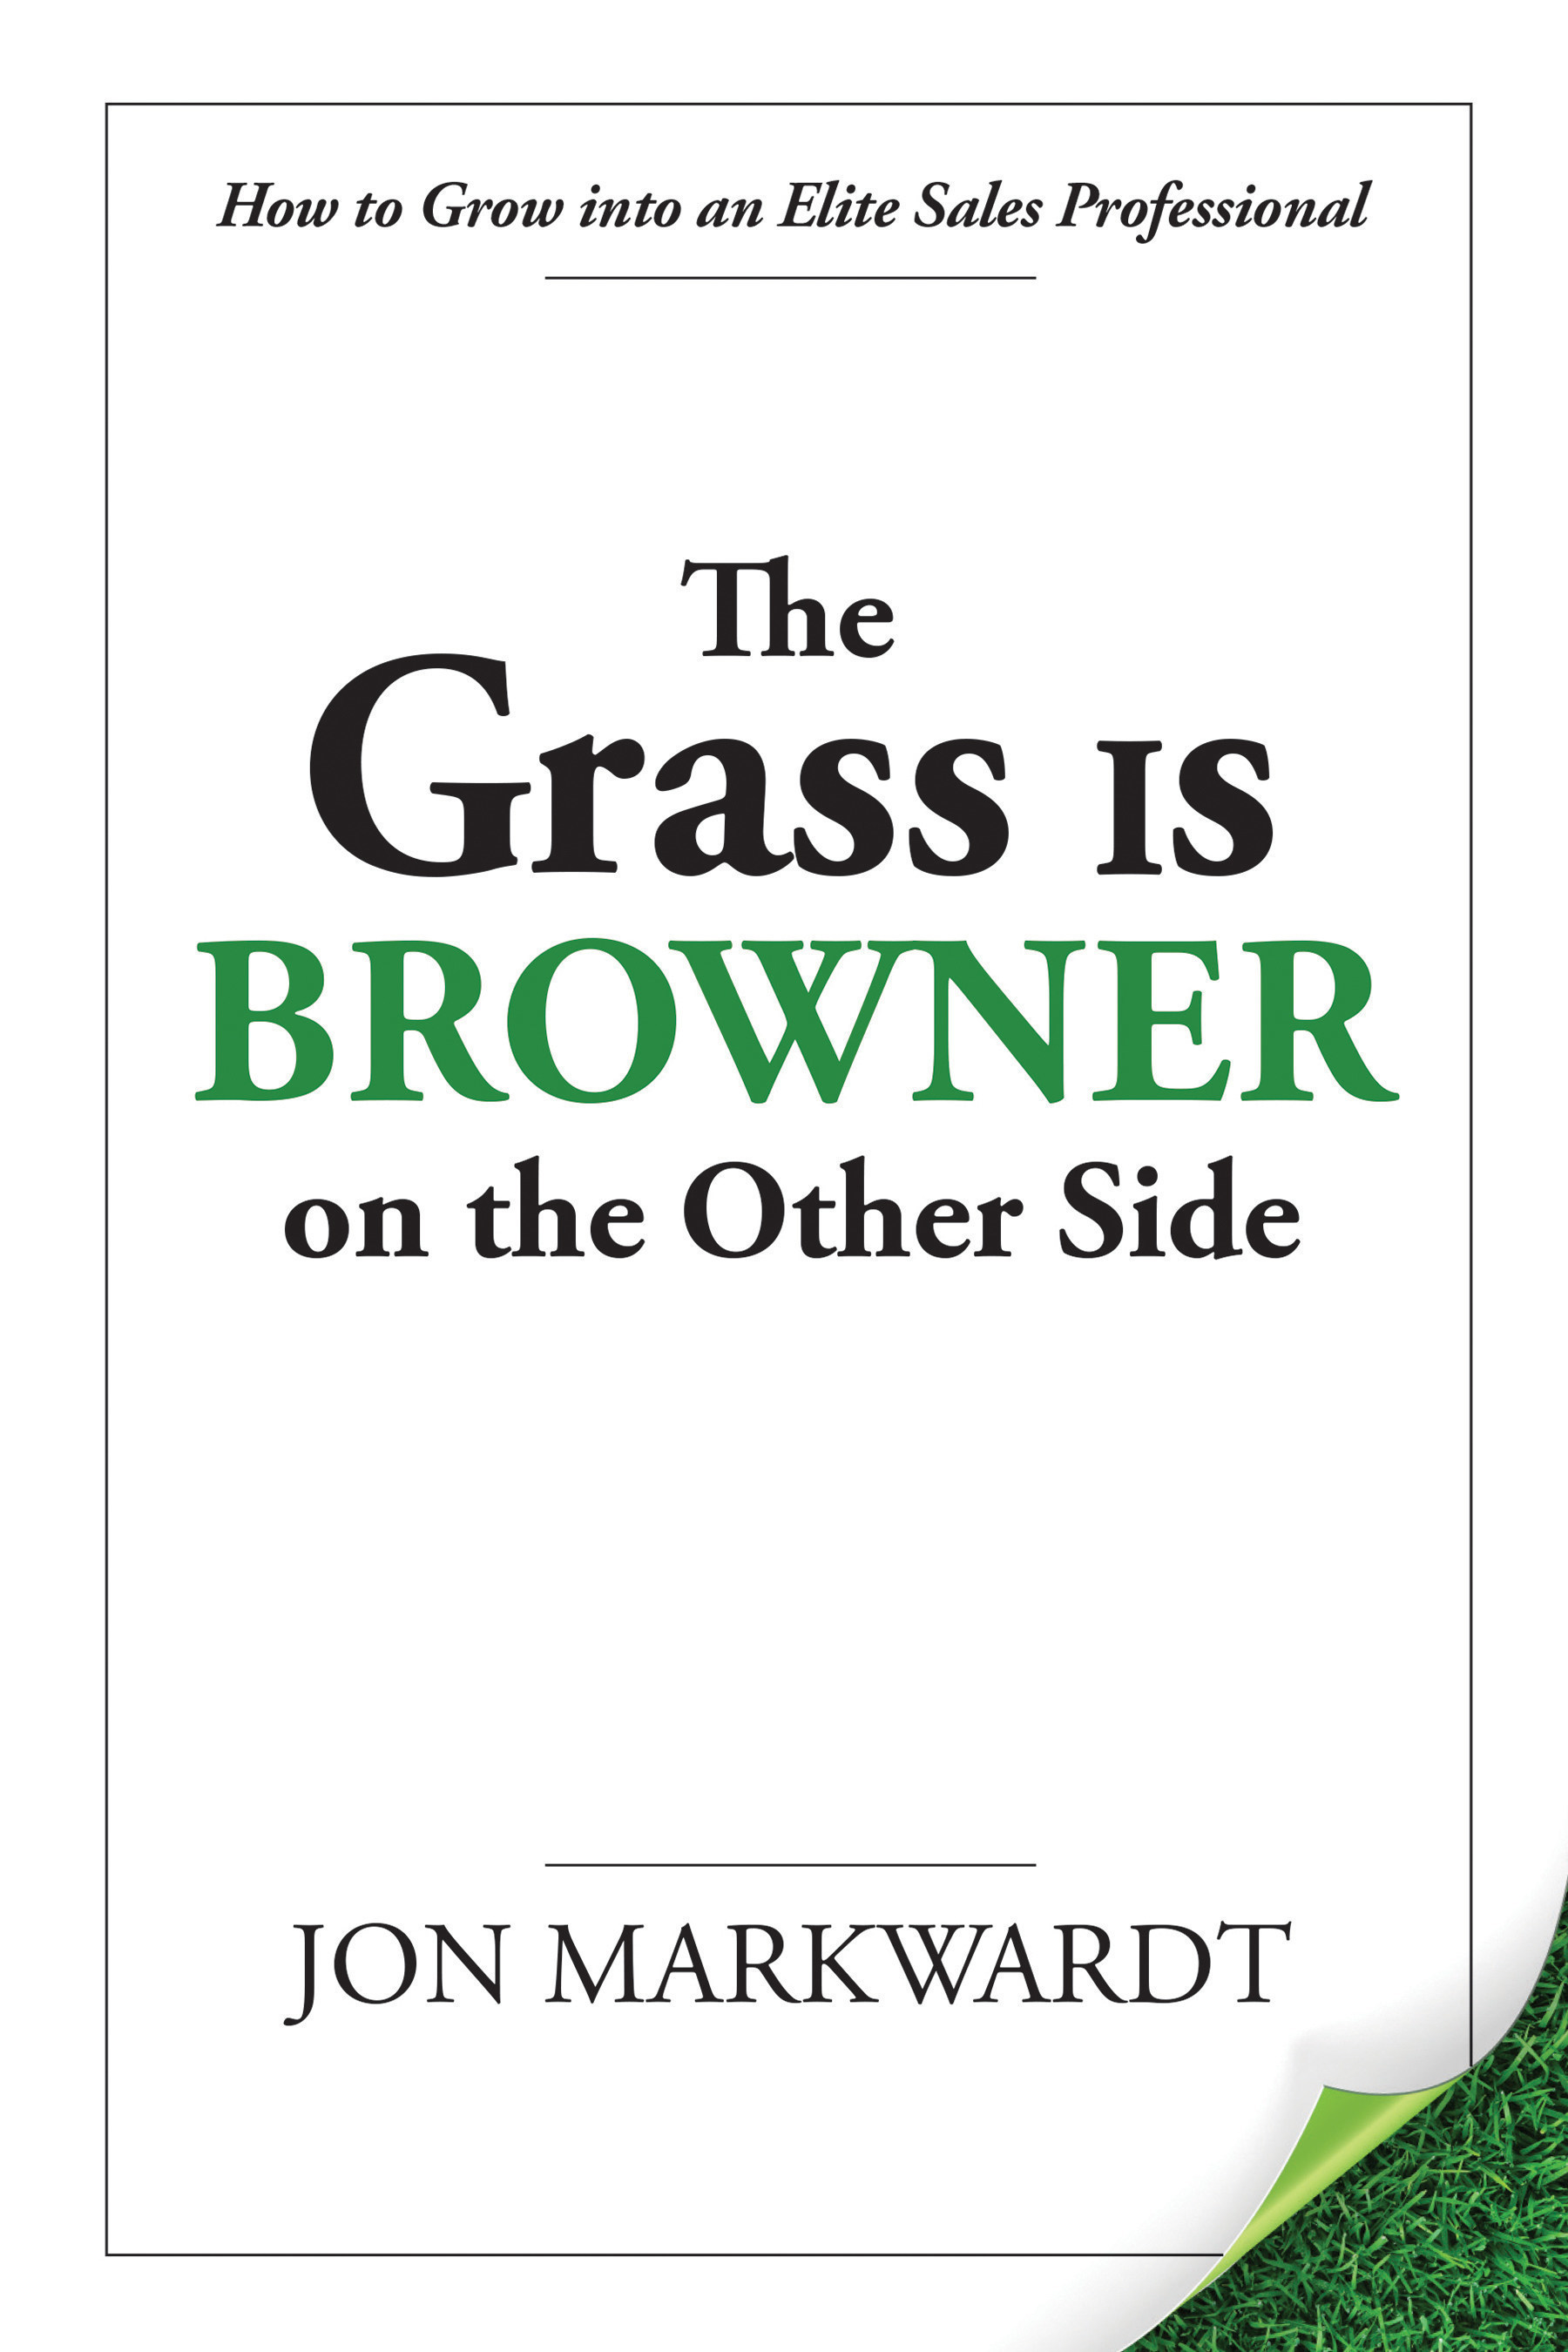 The Grass Is Browner on the Other Side: How to Grow into an Elite Sales Professional by Jon Markwardt